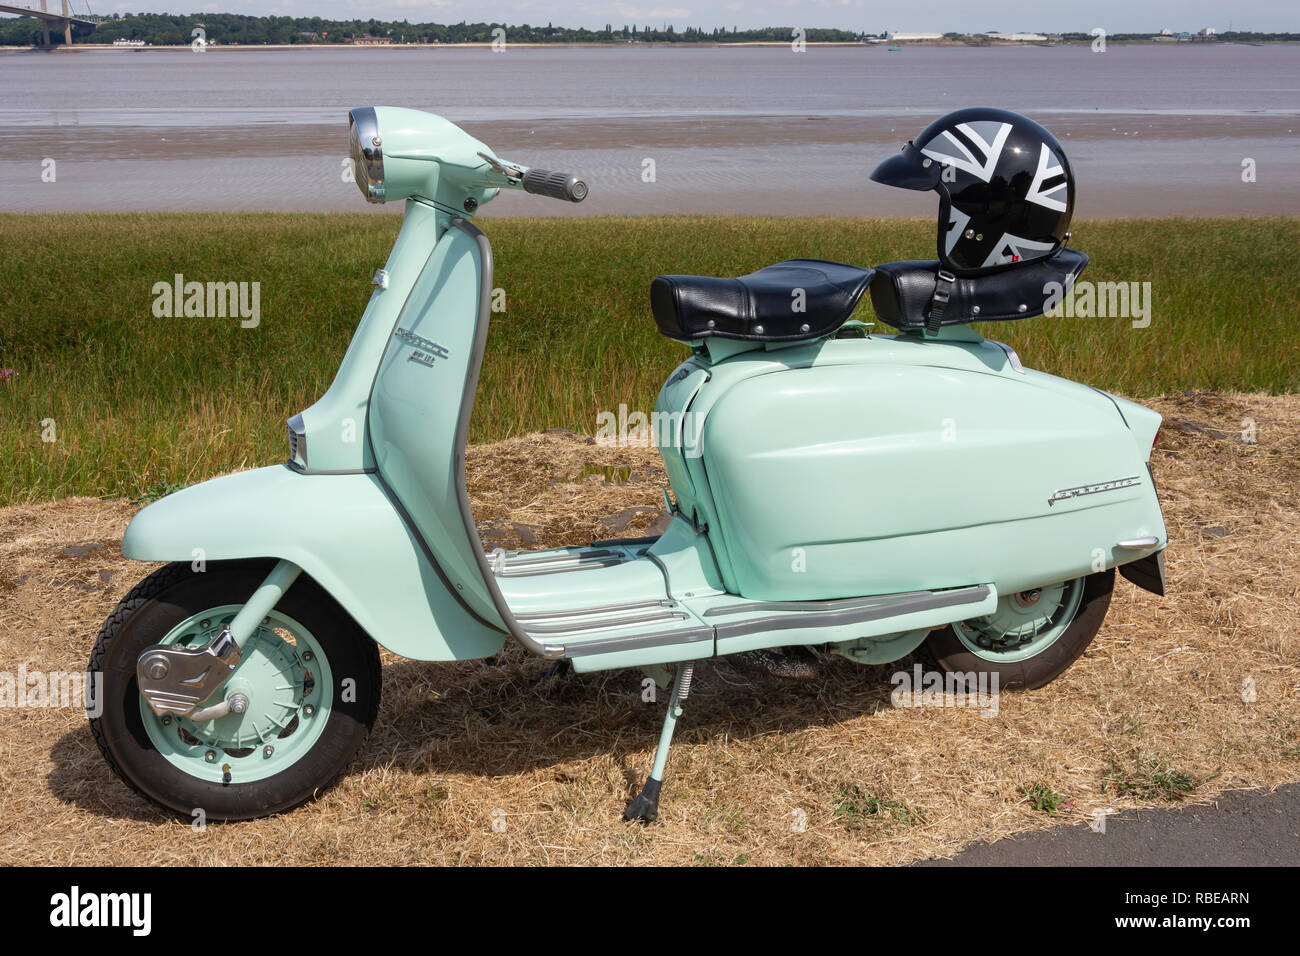 Lambretta scooter rétro sur Riverside, Barton-upon-Humber, Lincolnshire, Angleterre, Royaume-Uni Banque D'Images